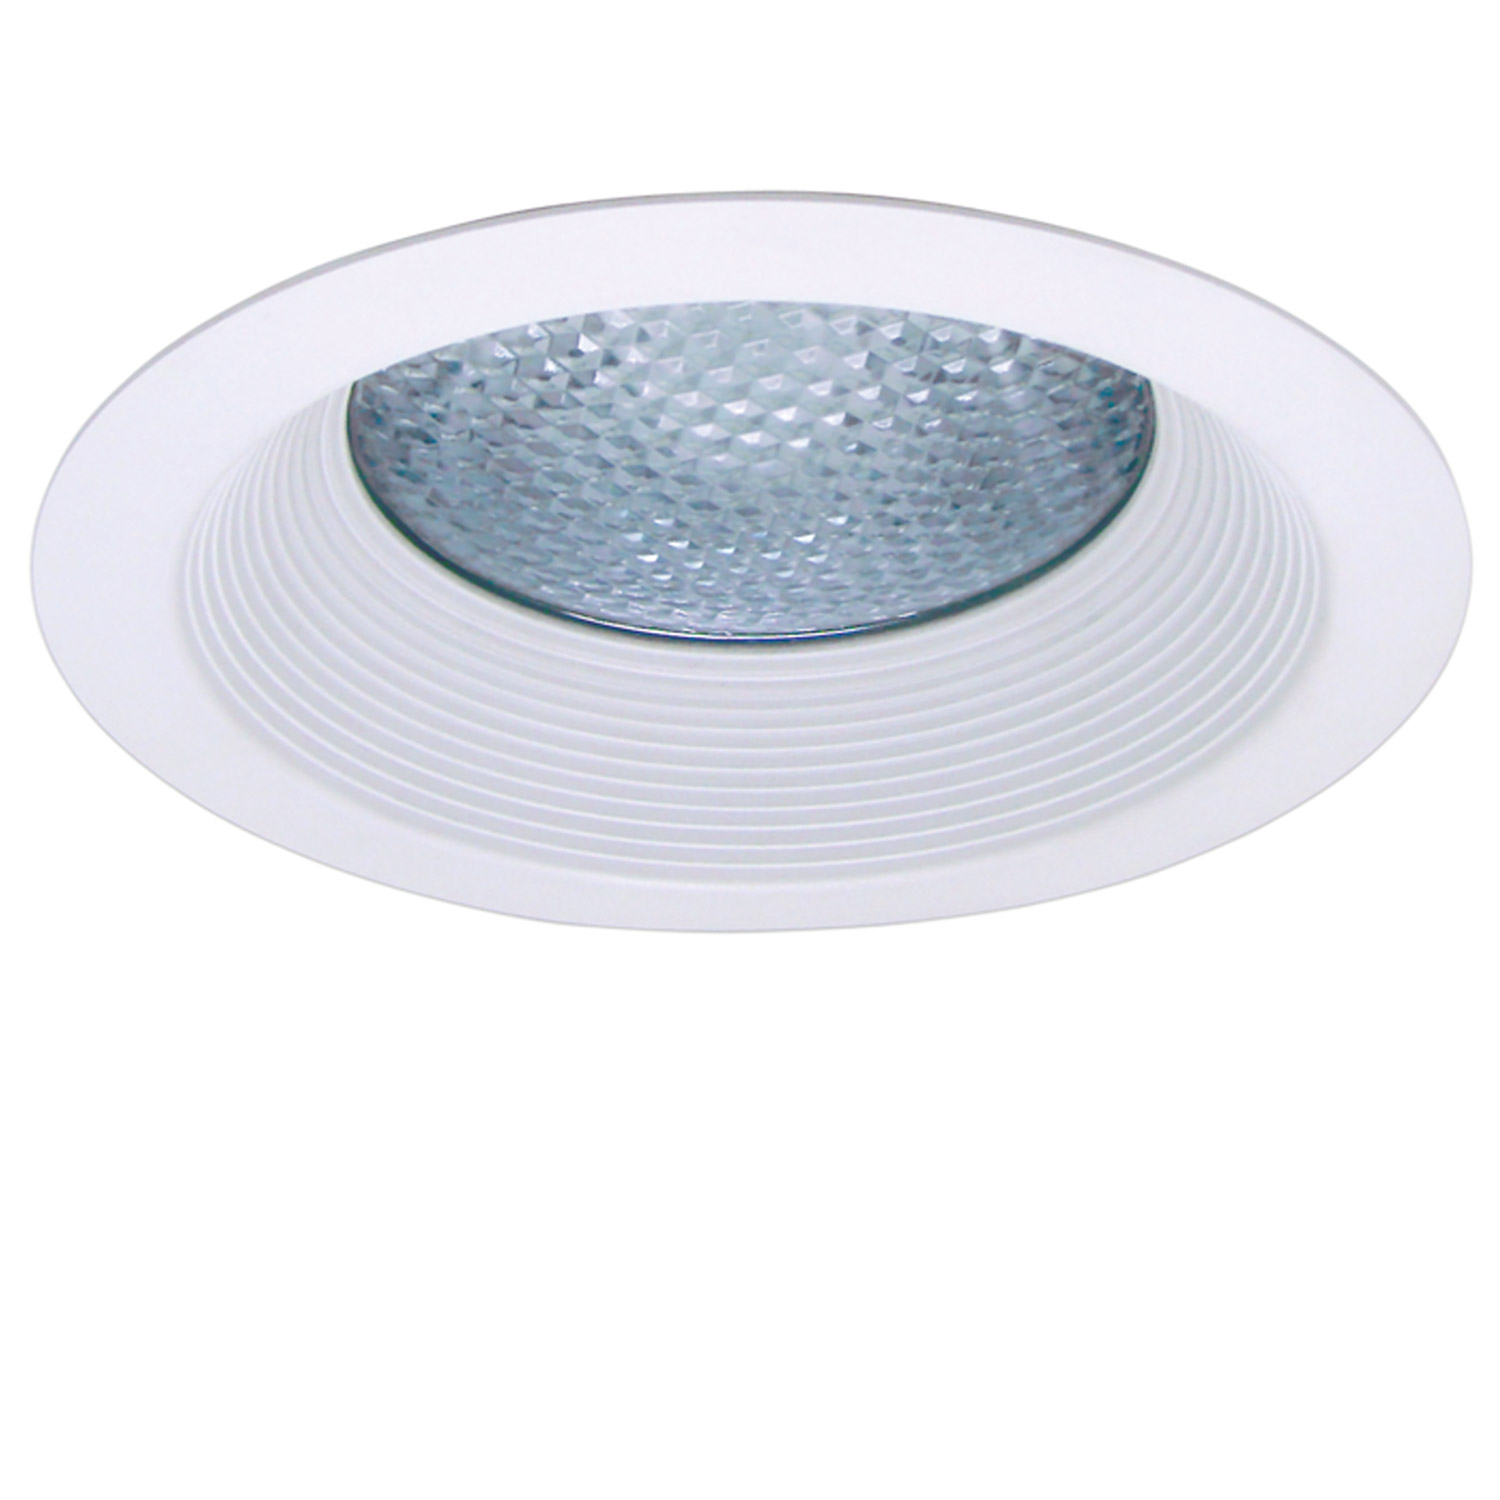 Product image for R6 Series Two Piece Reflector: Lower Baffle with Prismatic Convex Lens